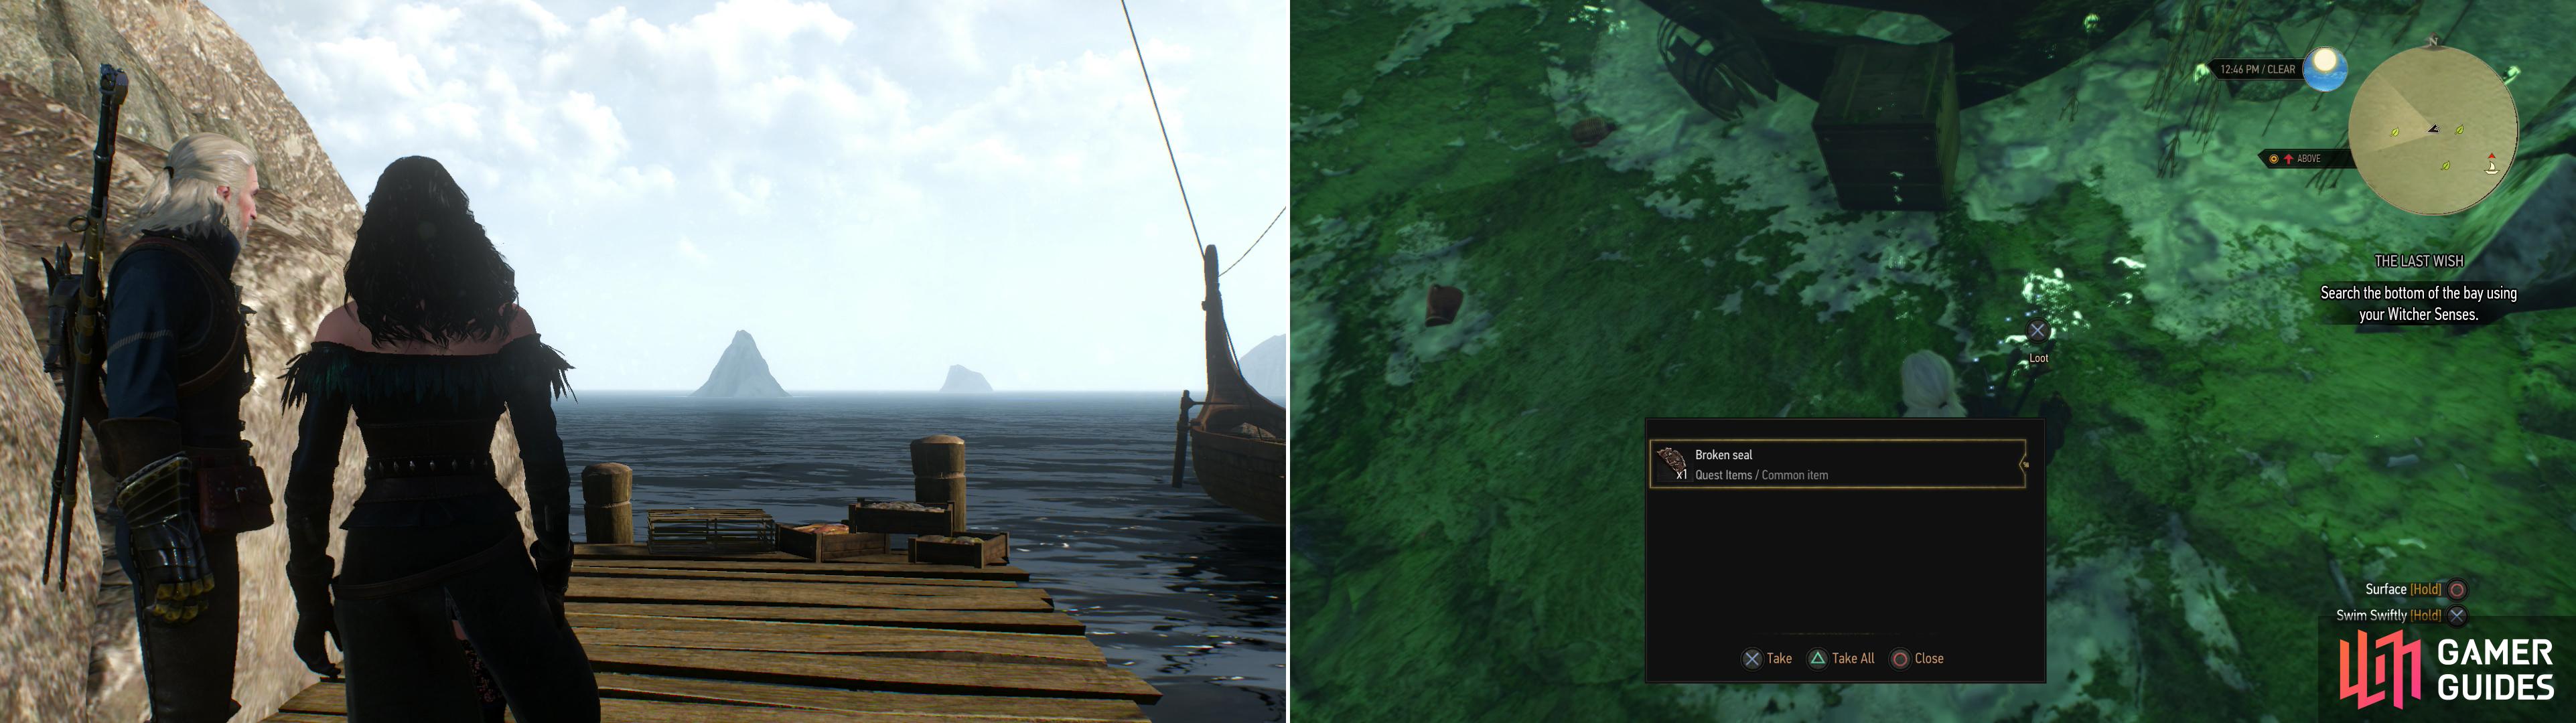 Yennefer’s continuing fascination will see you two search the sea for clues that might lead her to an elusive and powerful Djinn (left). Of course, it’ll be Geralt who actually has to get wet (right).